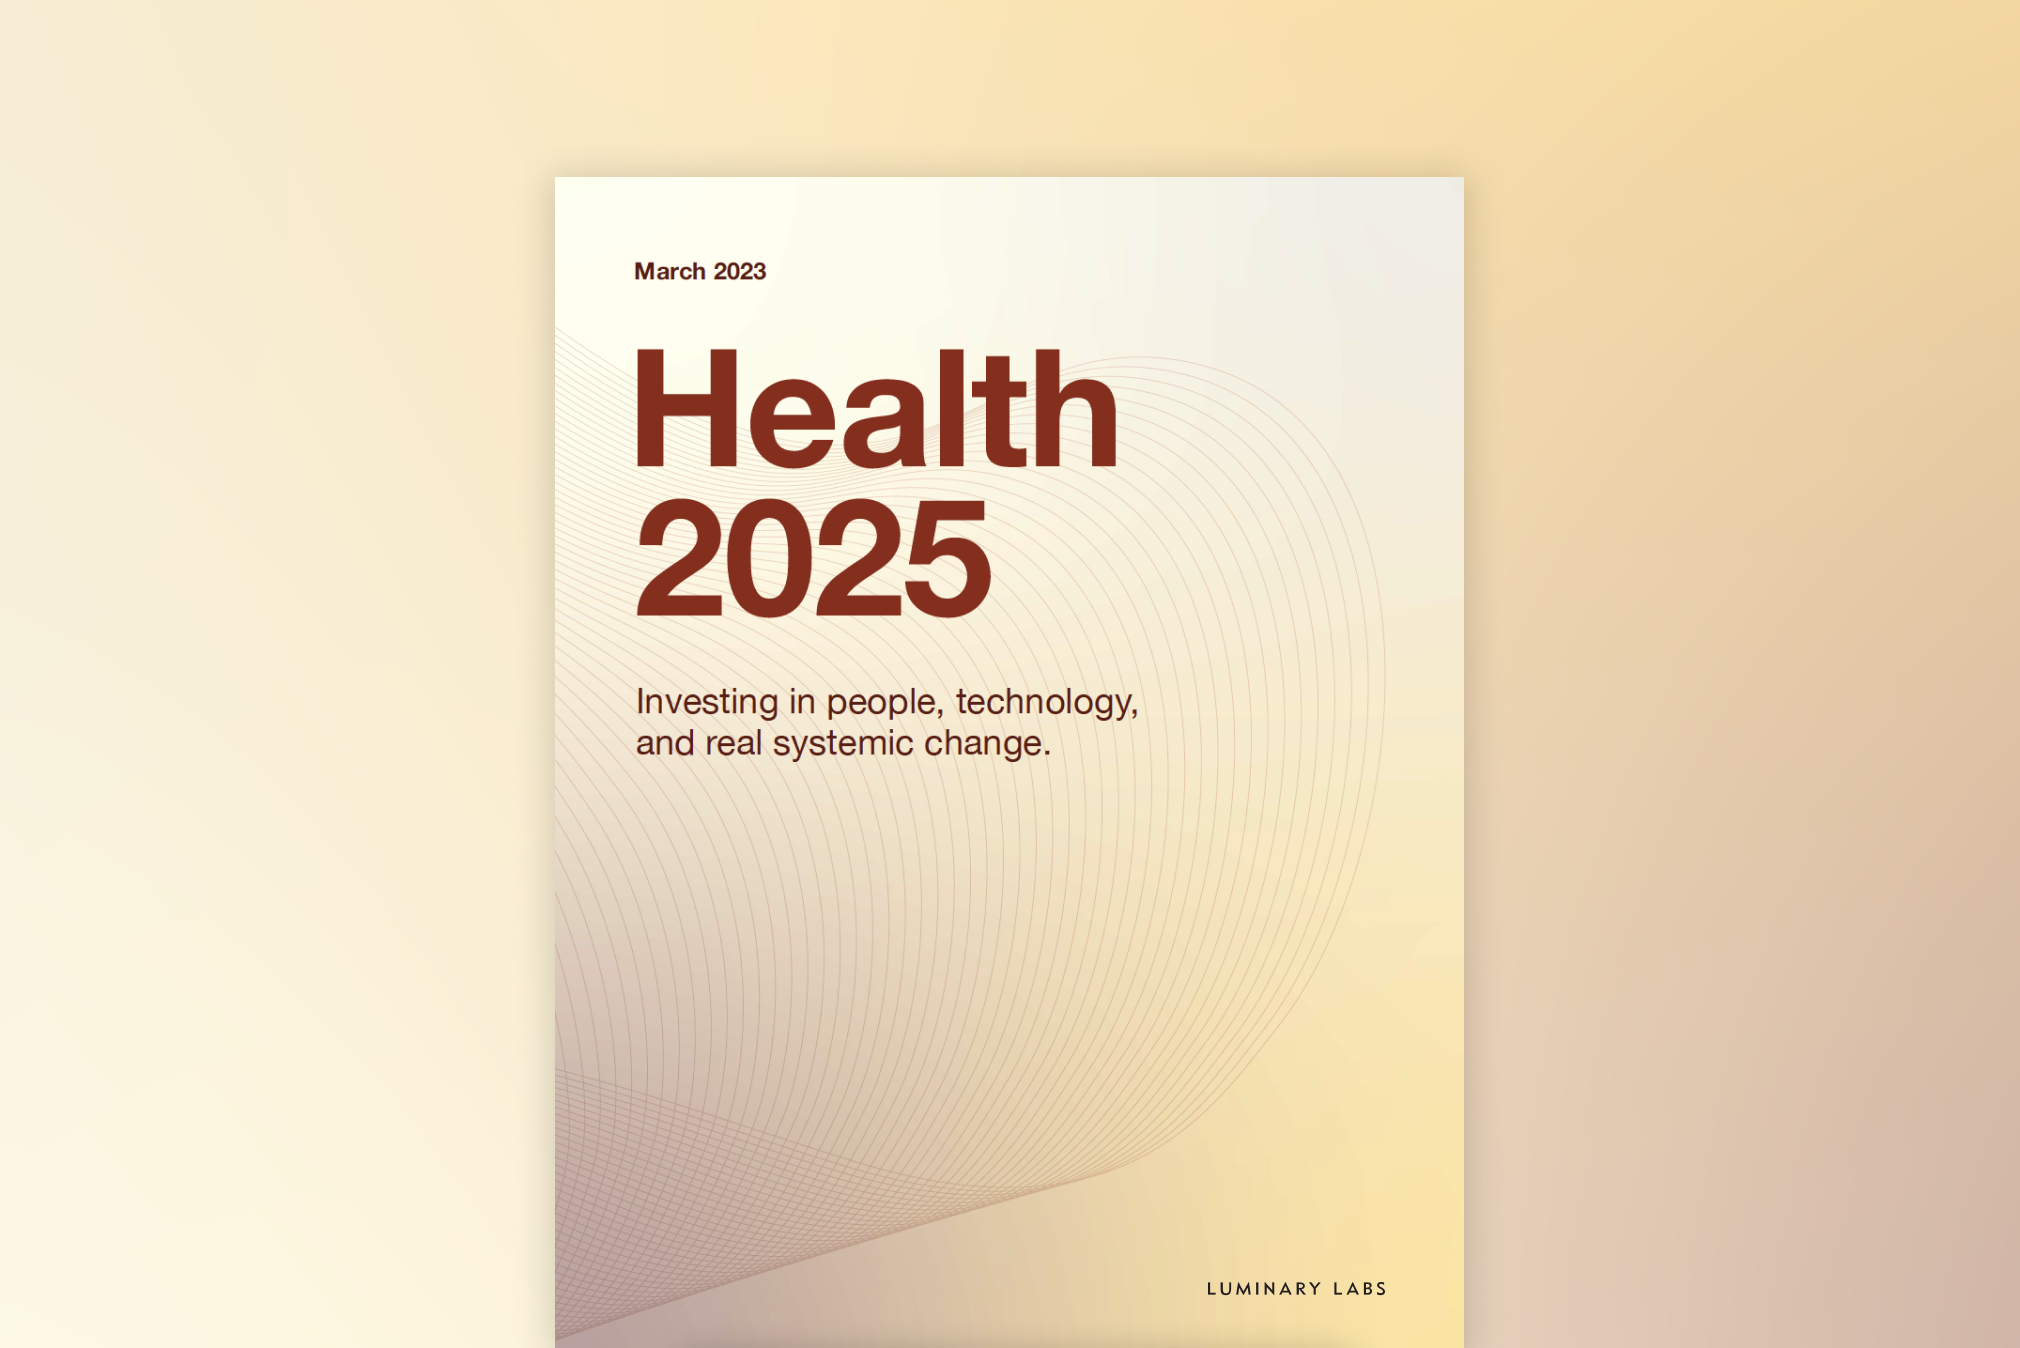 Health 2025: Investing in people, technology, and real systemic change